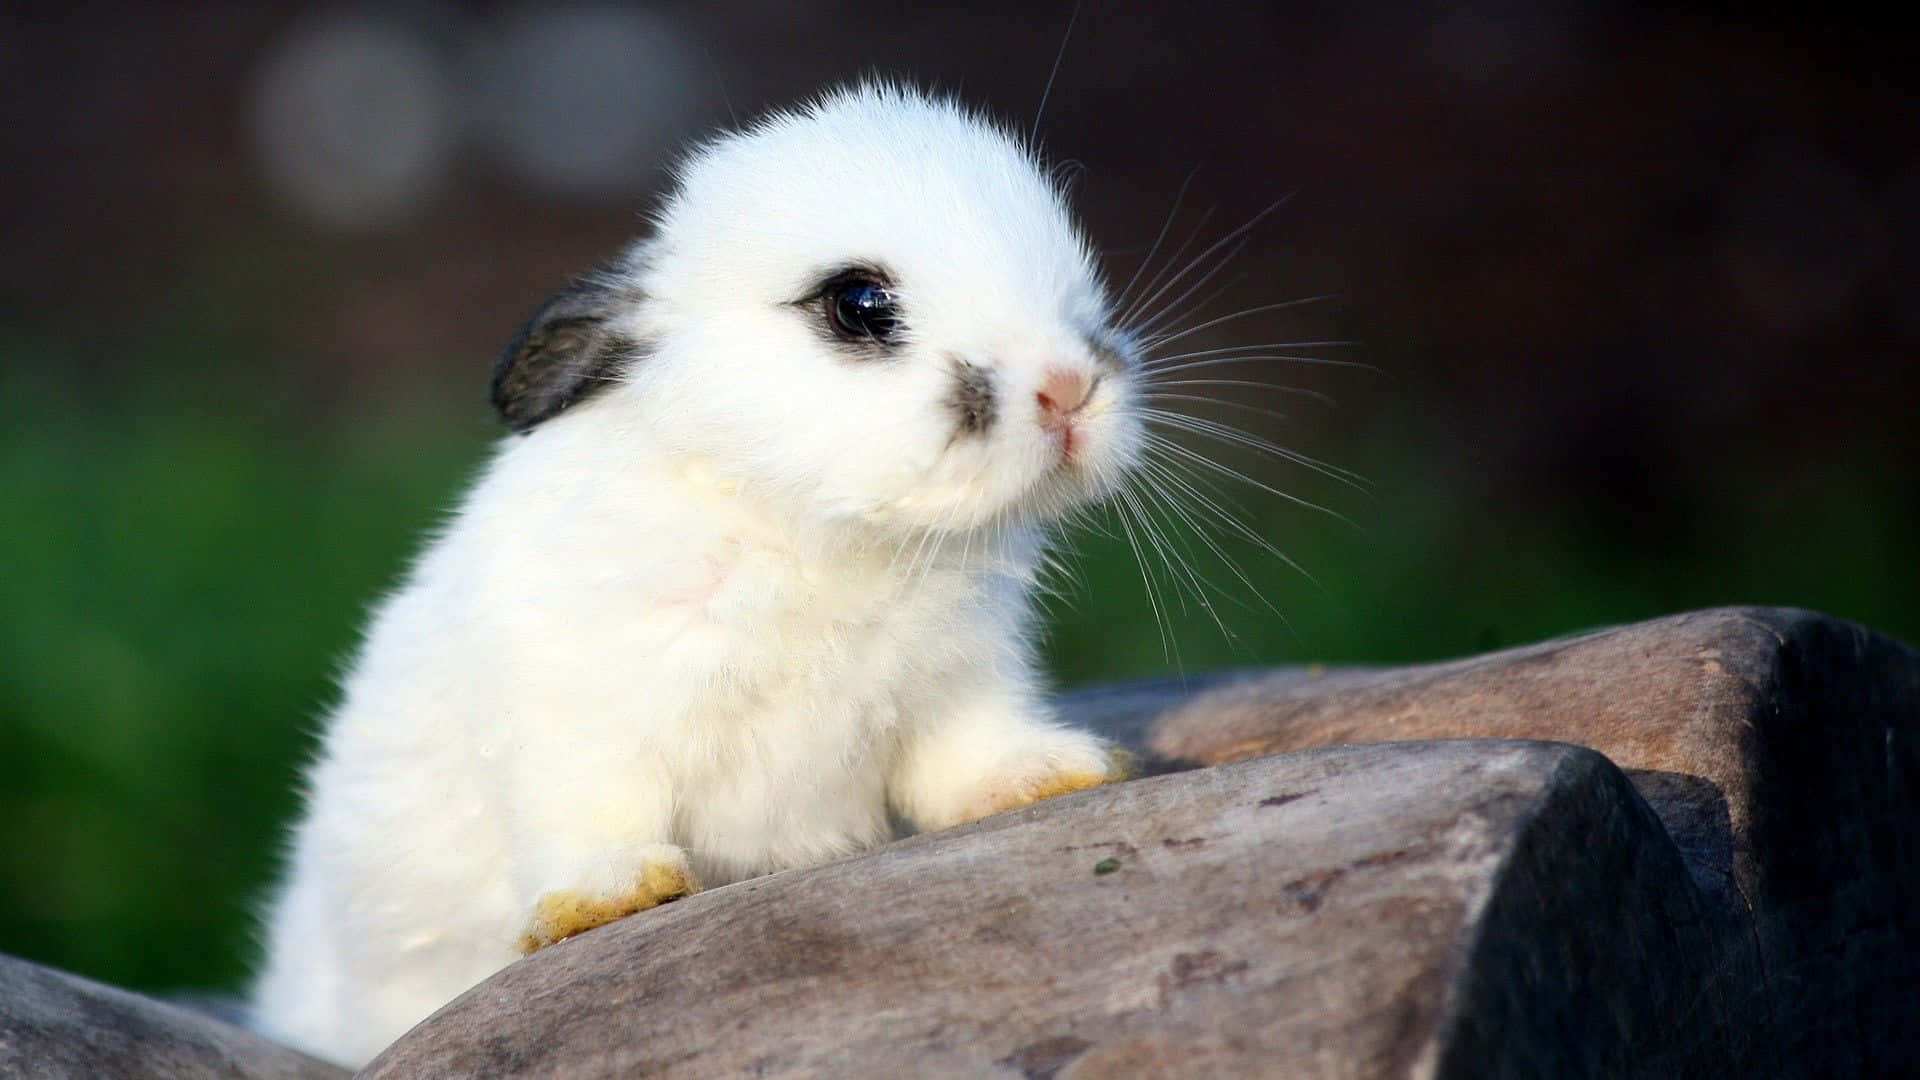 cutest baby animal in the world